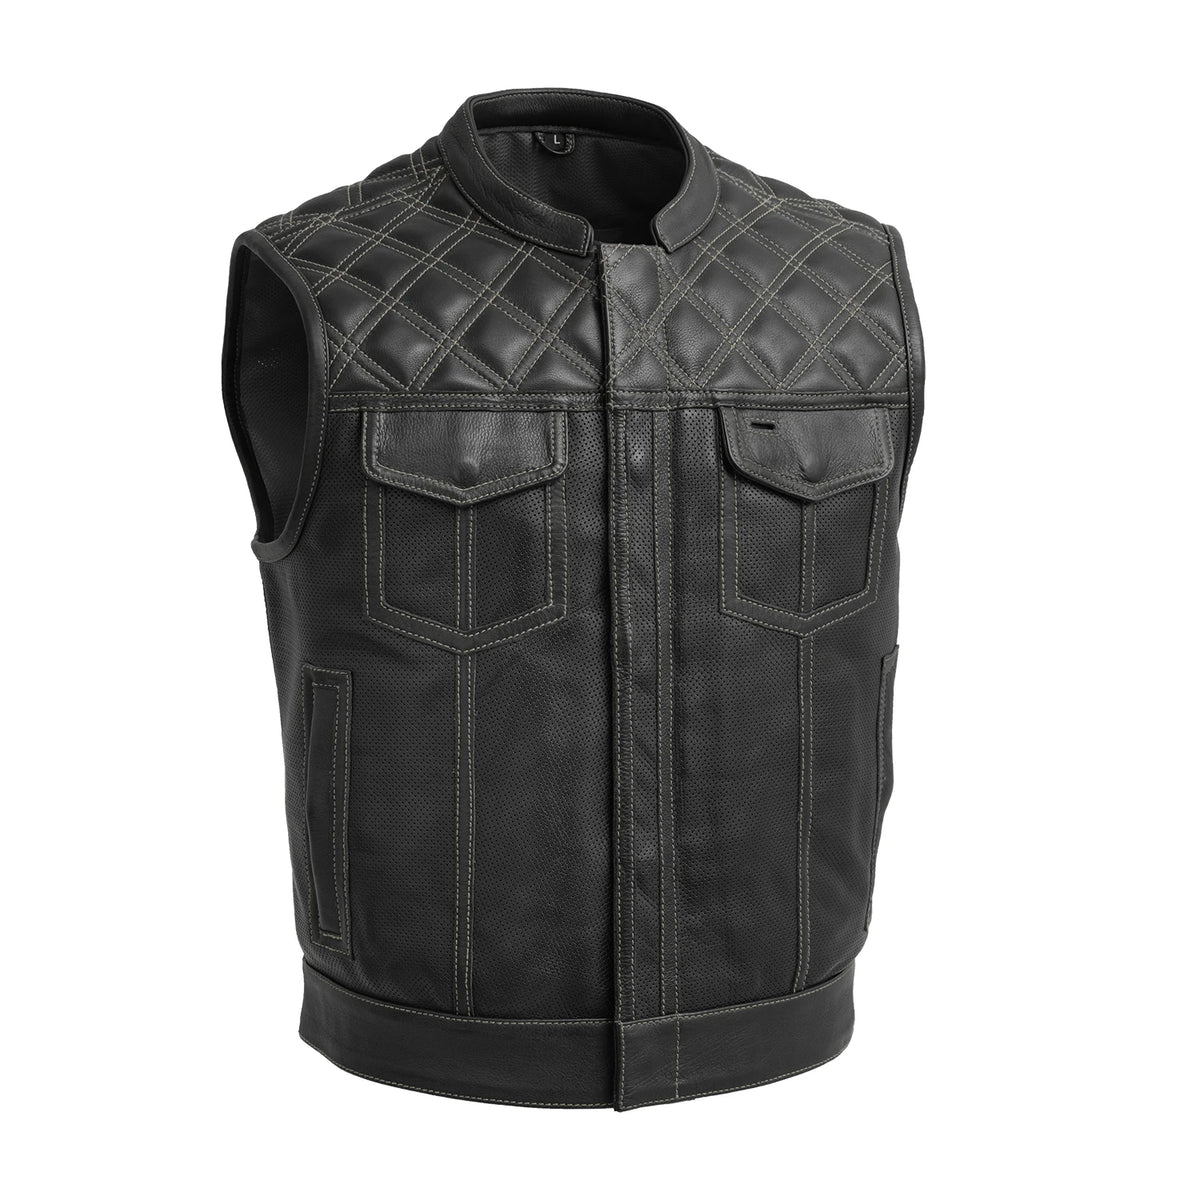 Upside Perforated Men's Club Style Leather Vest Men's Leather Vest First Manufacturing Company Grey S 